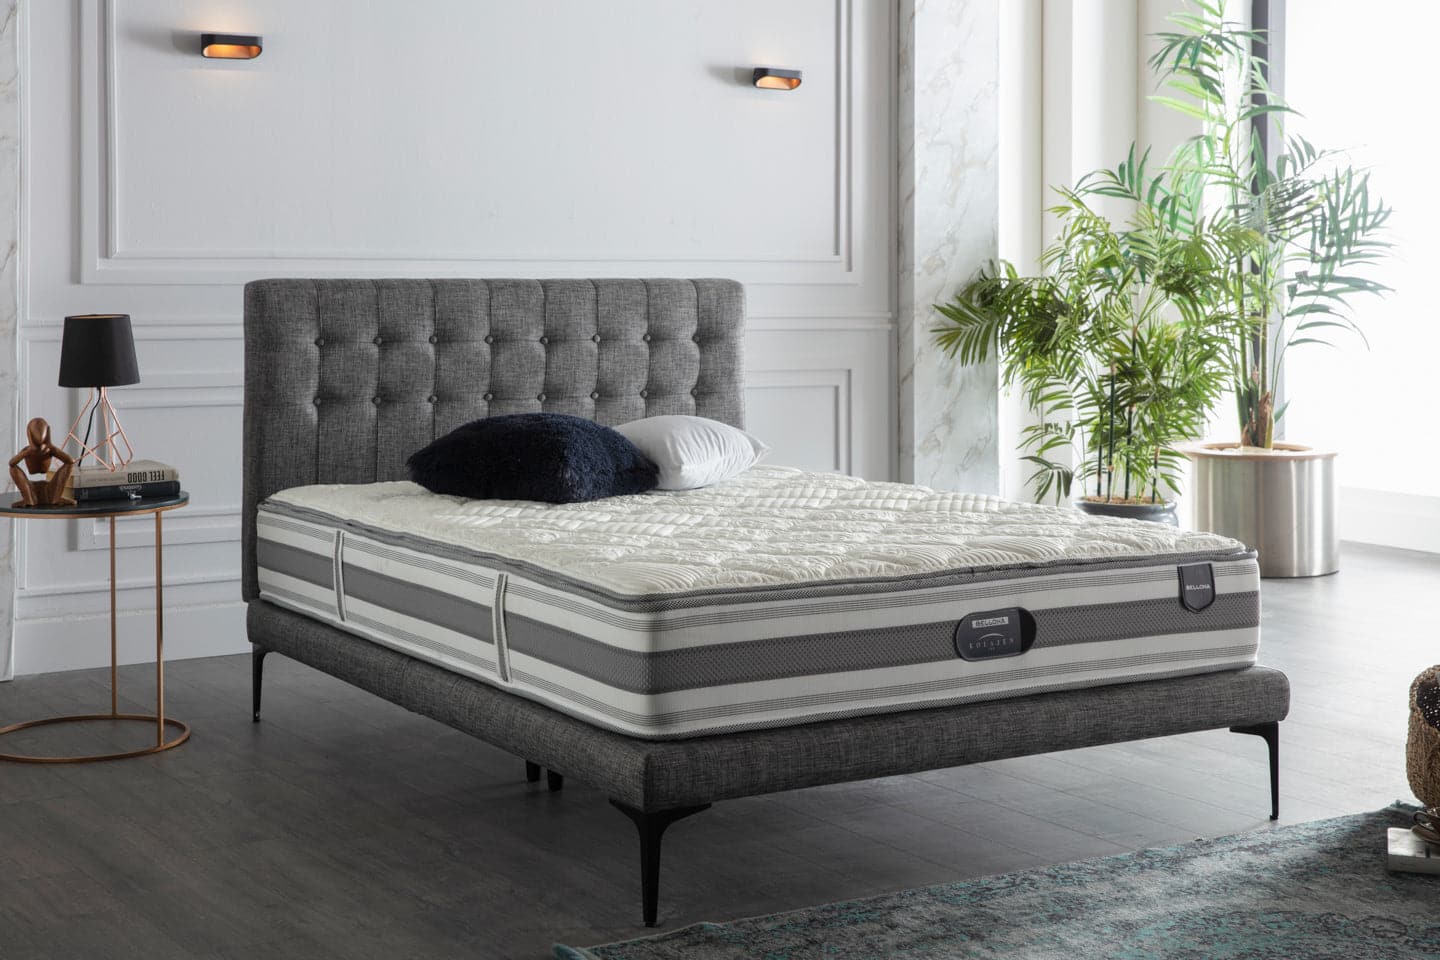 Stratton Bed In A Box by Bellona